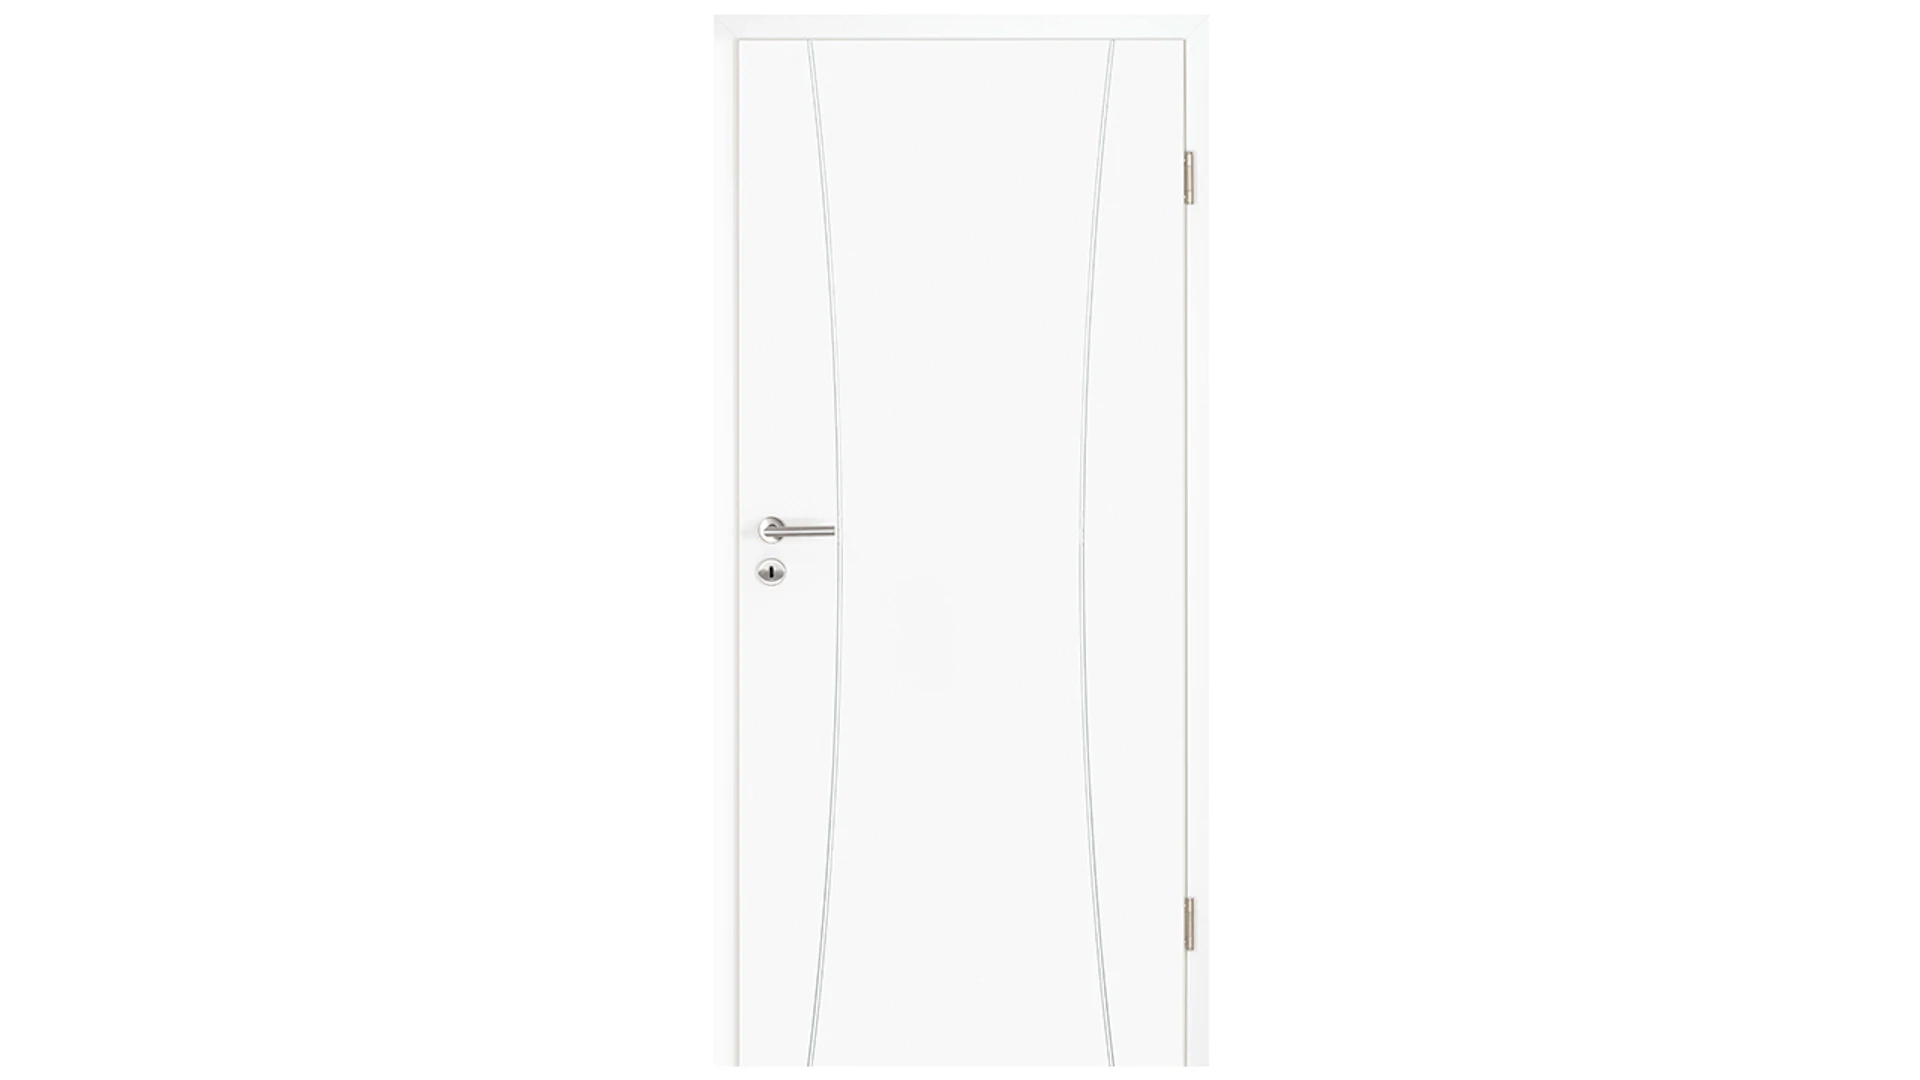 planeo interior door lacquer 2.0 - Kunibald 9010 white lacquer 2110 x 610 mm DIN R - round RSP hinge 3-t